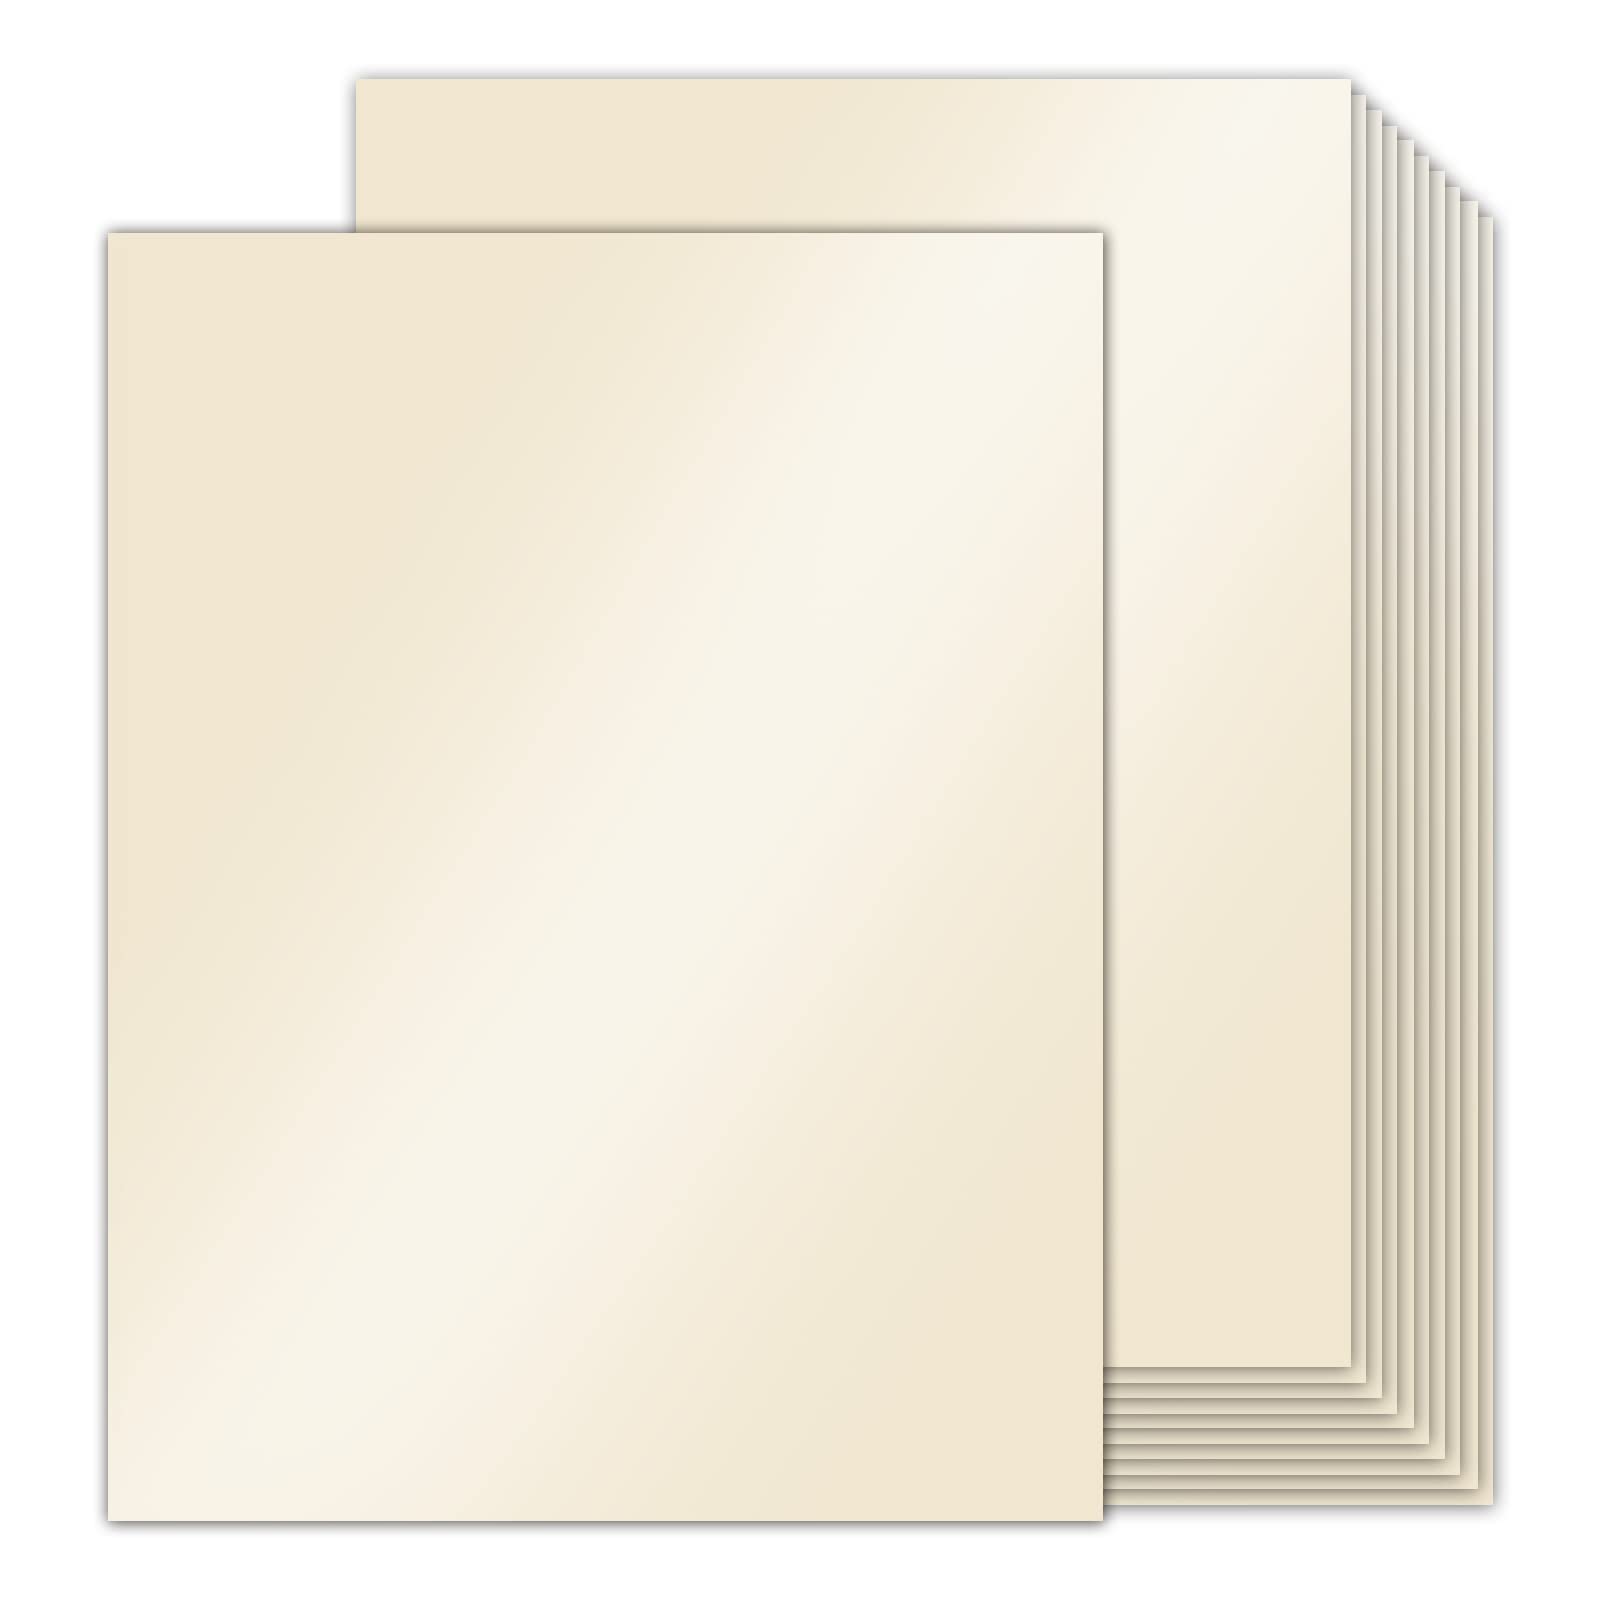 100 Sheets Cream Shimmer Cardstock 8.5 x 11 Metallic Paper Goefun 80lb Card  Stock Printer Paper for Invitations Certificates Crafts Card Making cream  shimmer 8.5x11